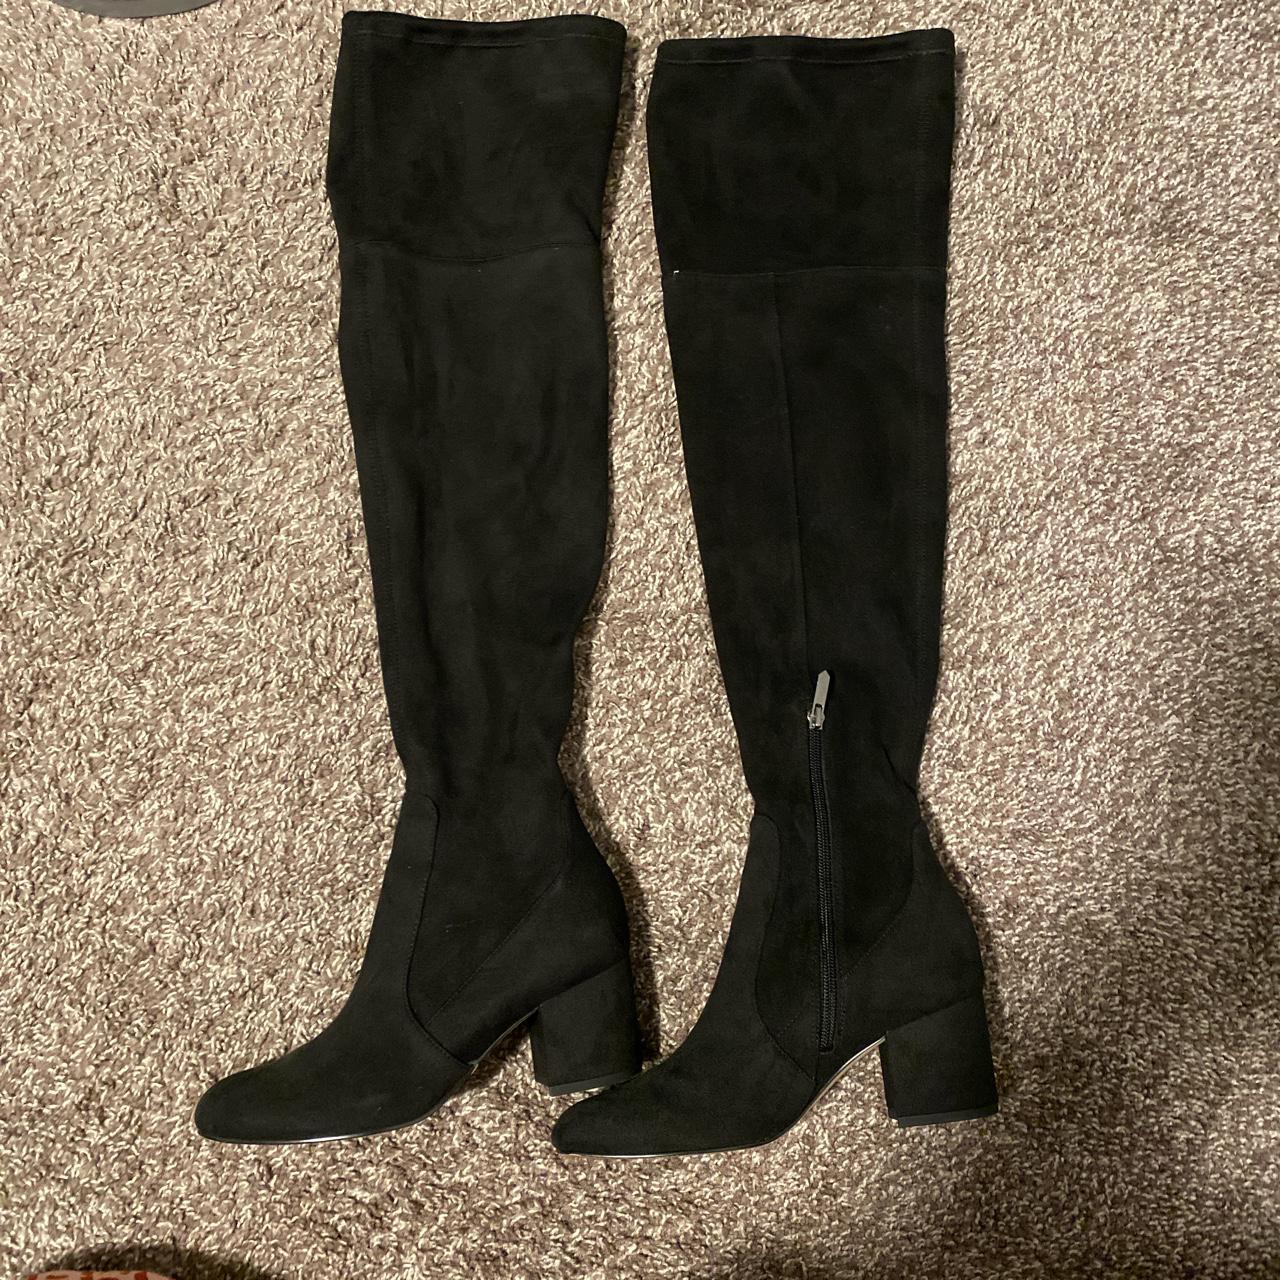 Velvet Knee High Boots 👢 that perfect for clubbing... - Depop